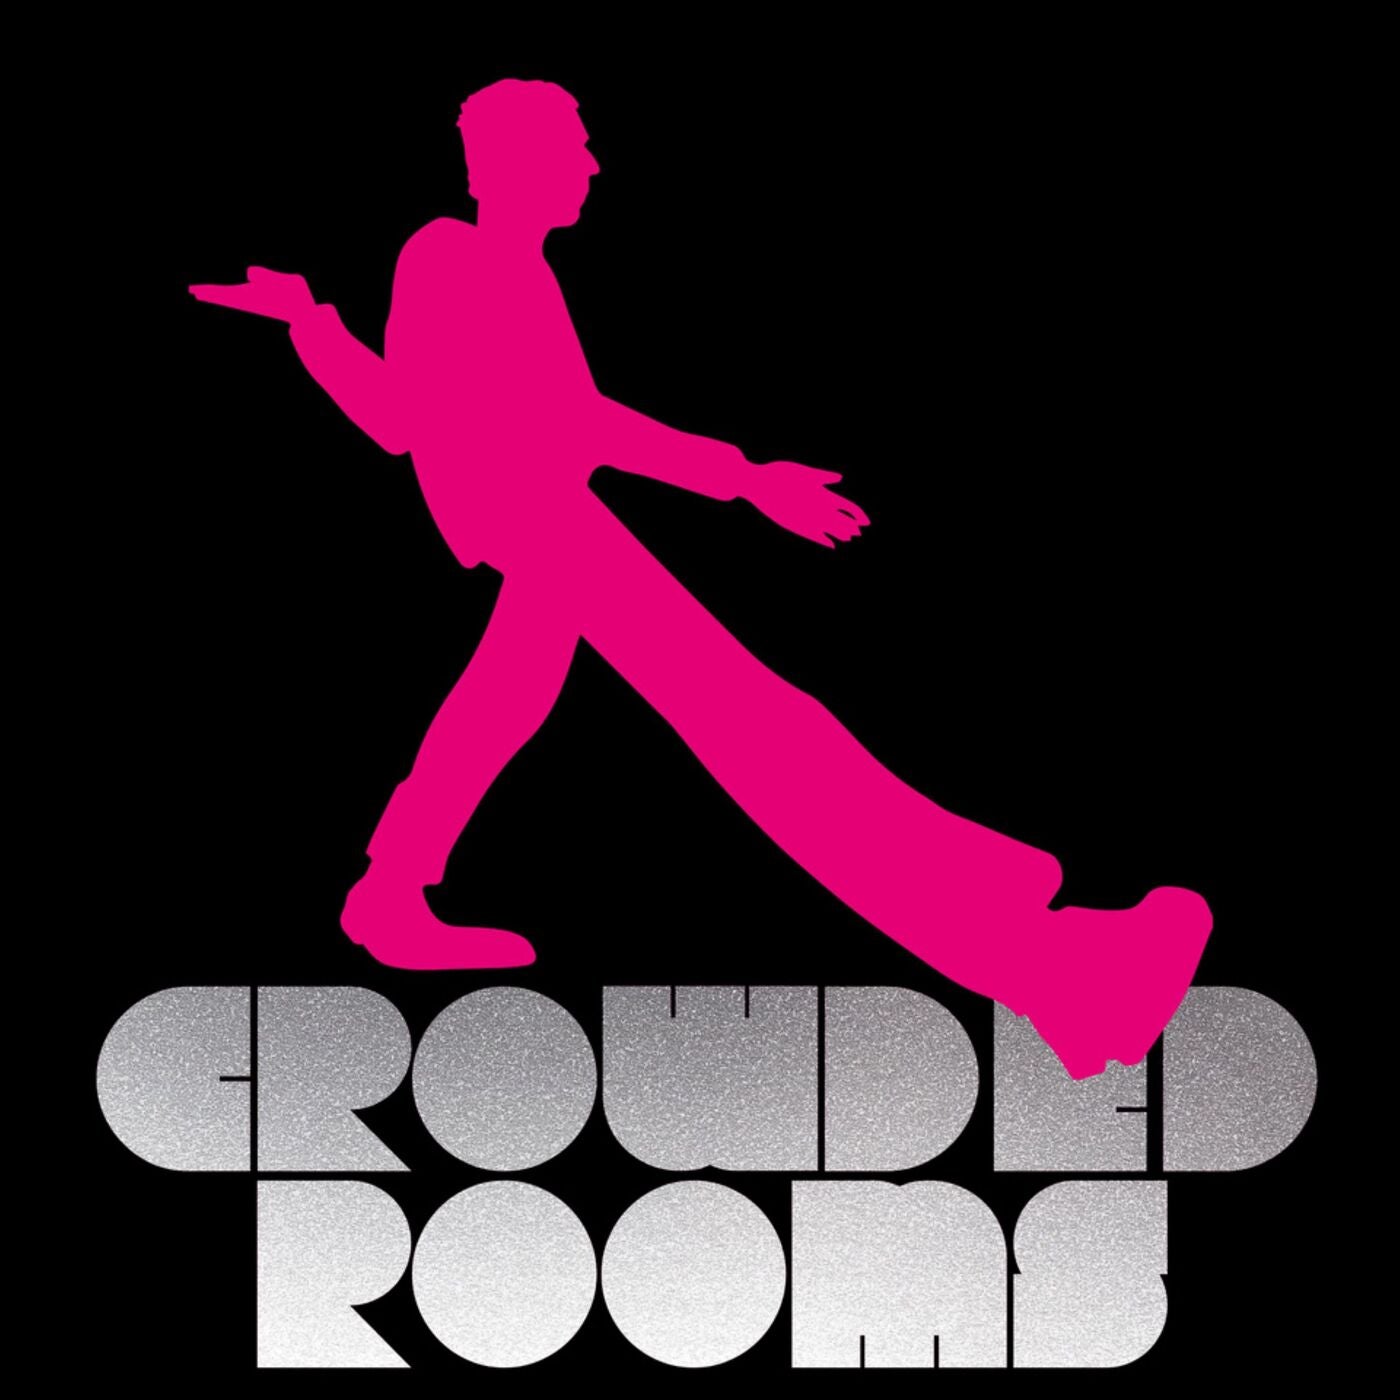 Crowded Rooms (Maximum Security Remix)